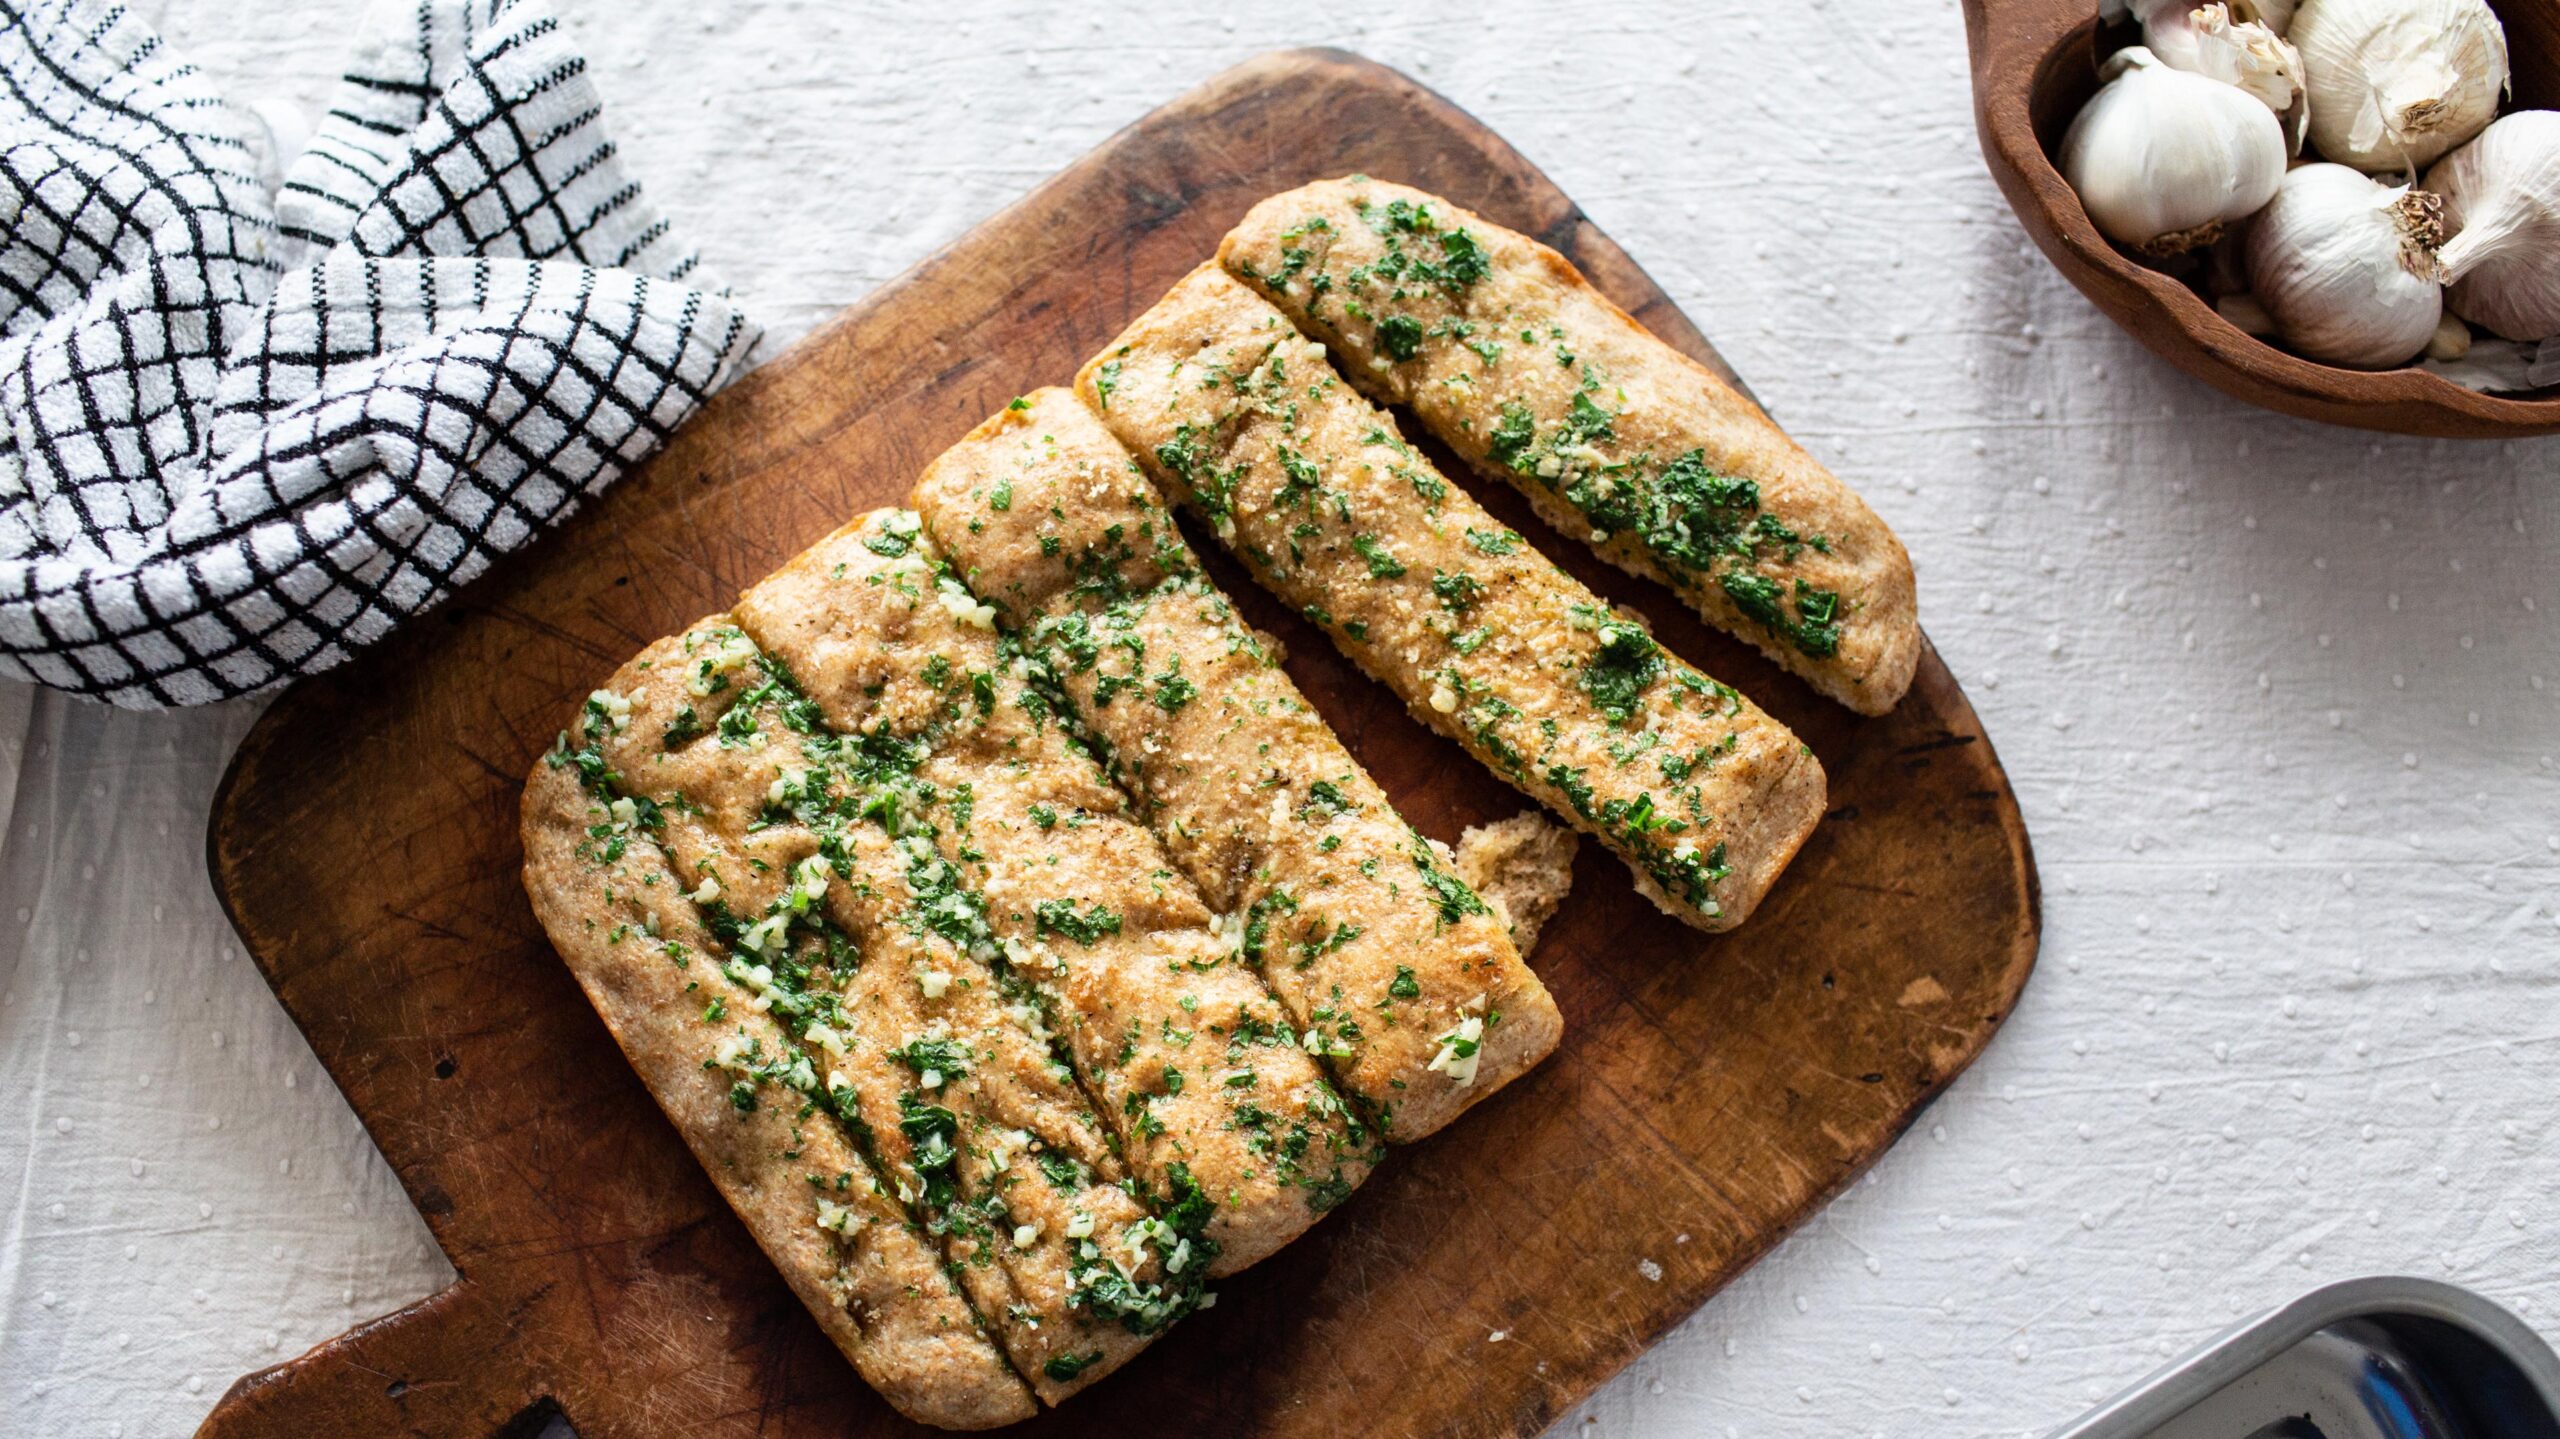 Delicious & Vegan: Garlicky Bread that will melt your heart